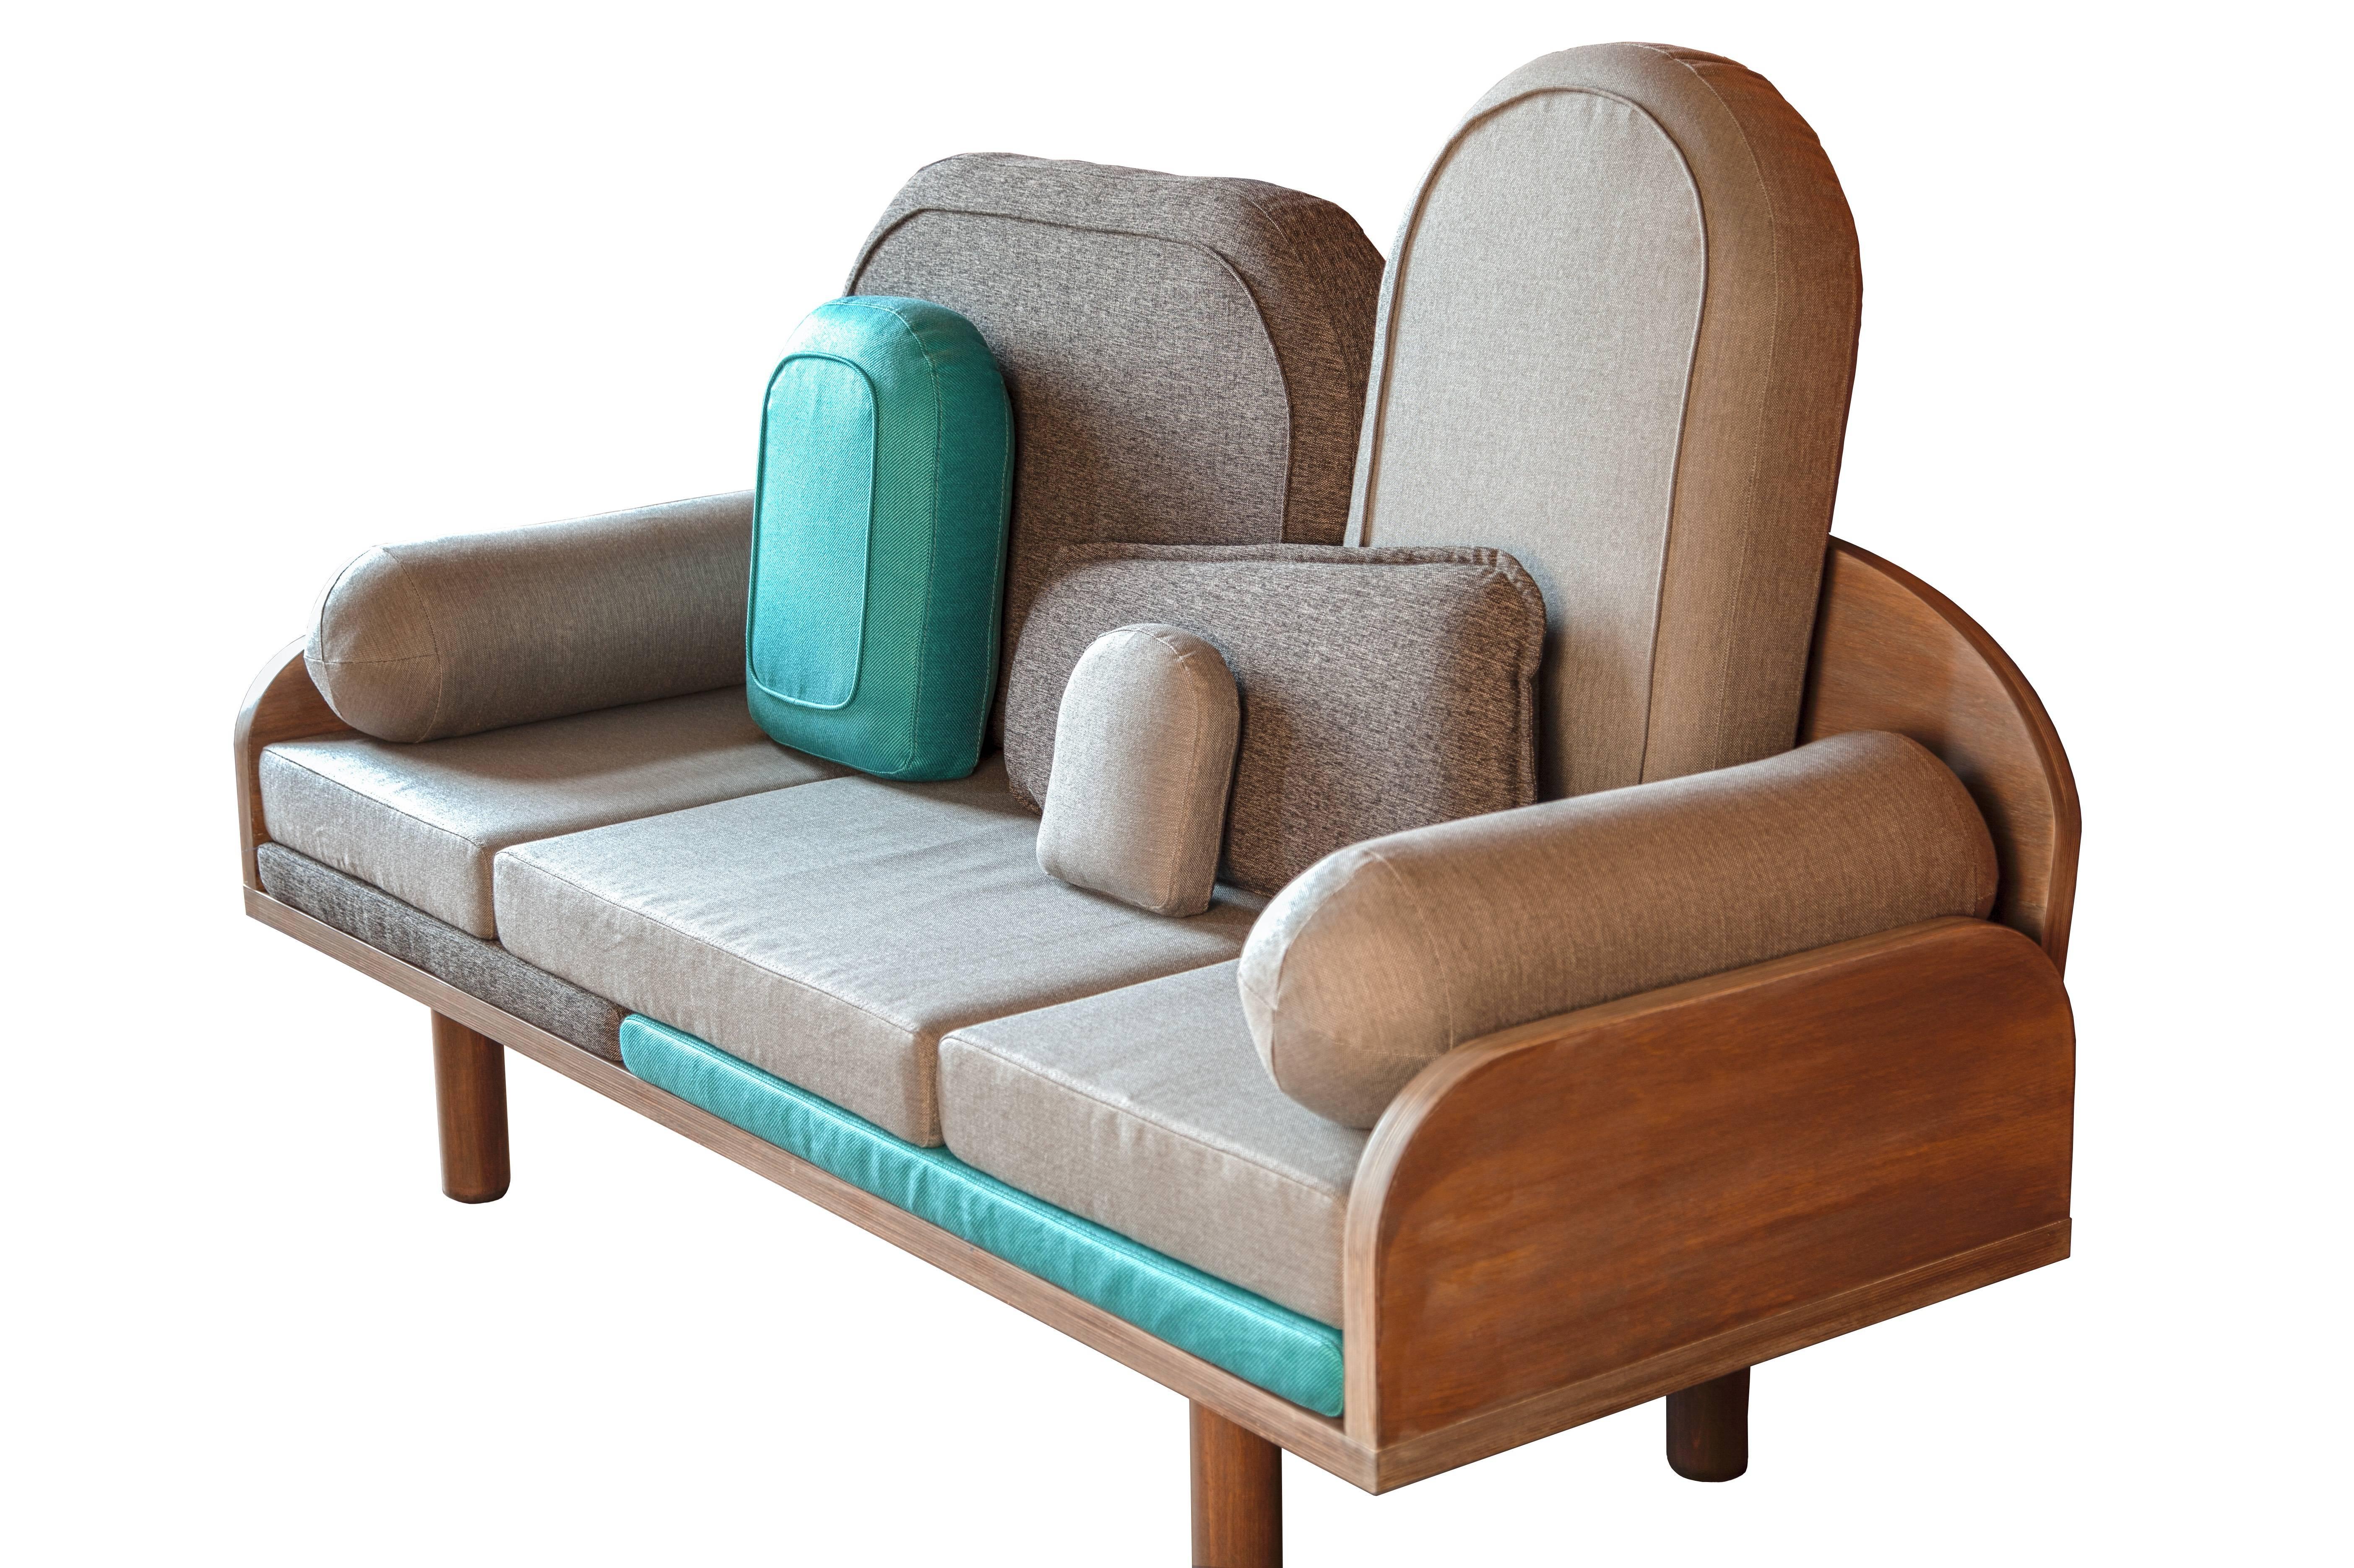 This French designed sofa with a unique patchwork of cushions, so you can create an infinite number of sitting possibilities. A three-seat sofa with a width of 200cm.

Material: Made in oak plywood and oil finish. High build polyurethane foam and